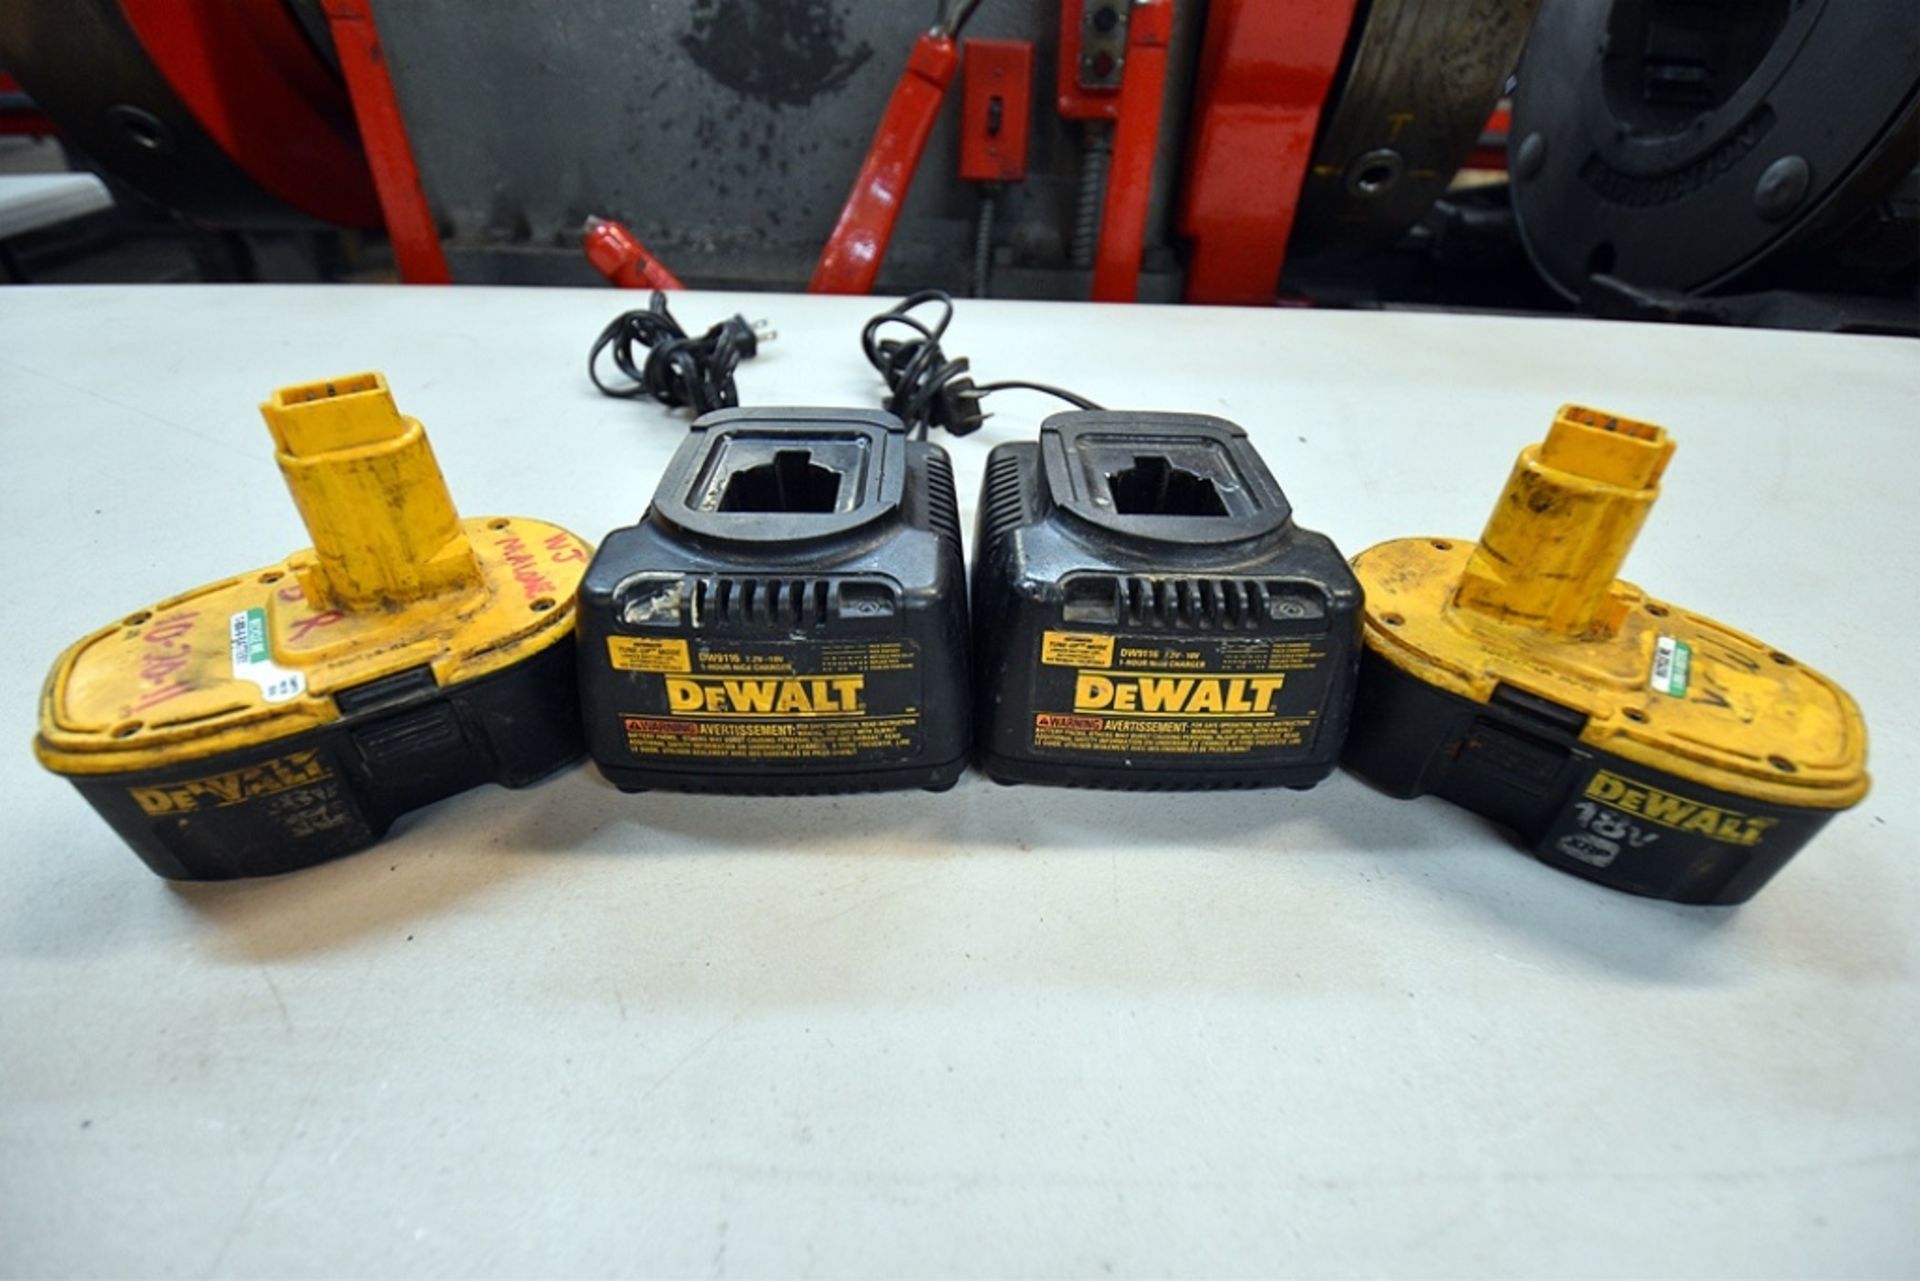 DeWalt DC385 Variable Speed Reciprocating Saws 18v w/ (4) Batteries and (2) Chargers - Image 5 of 5